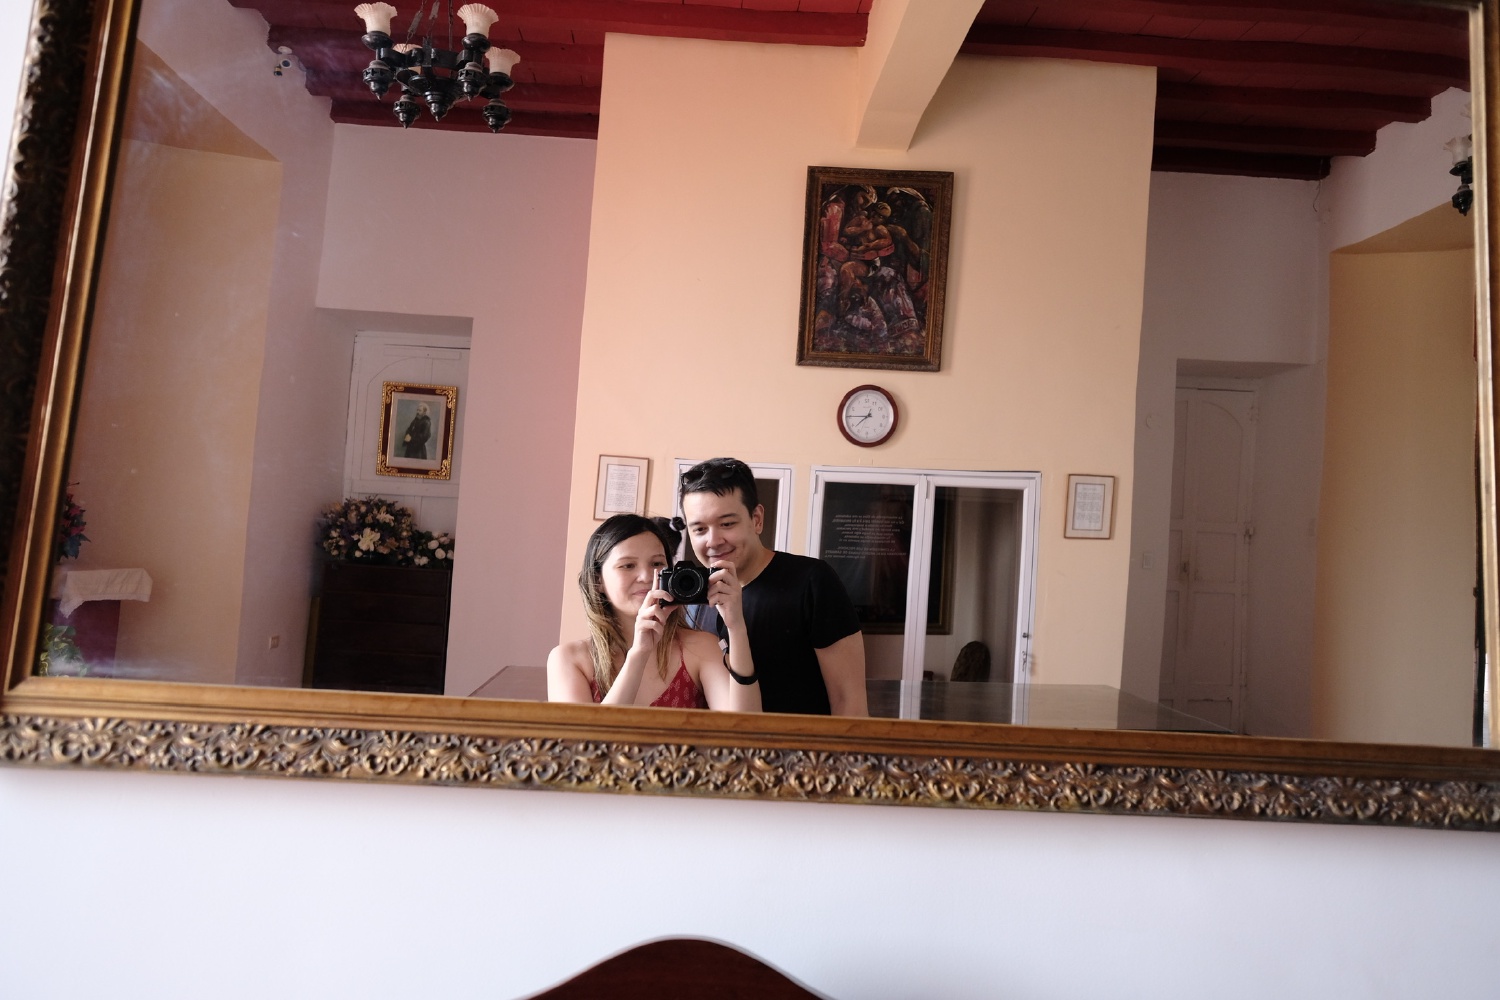 It's hard to travel and take photos together, so when there's a mirror --- go take a selfie!